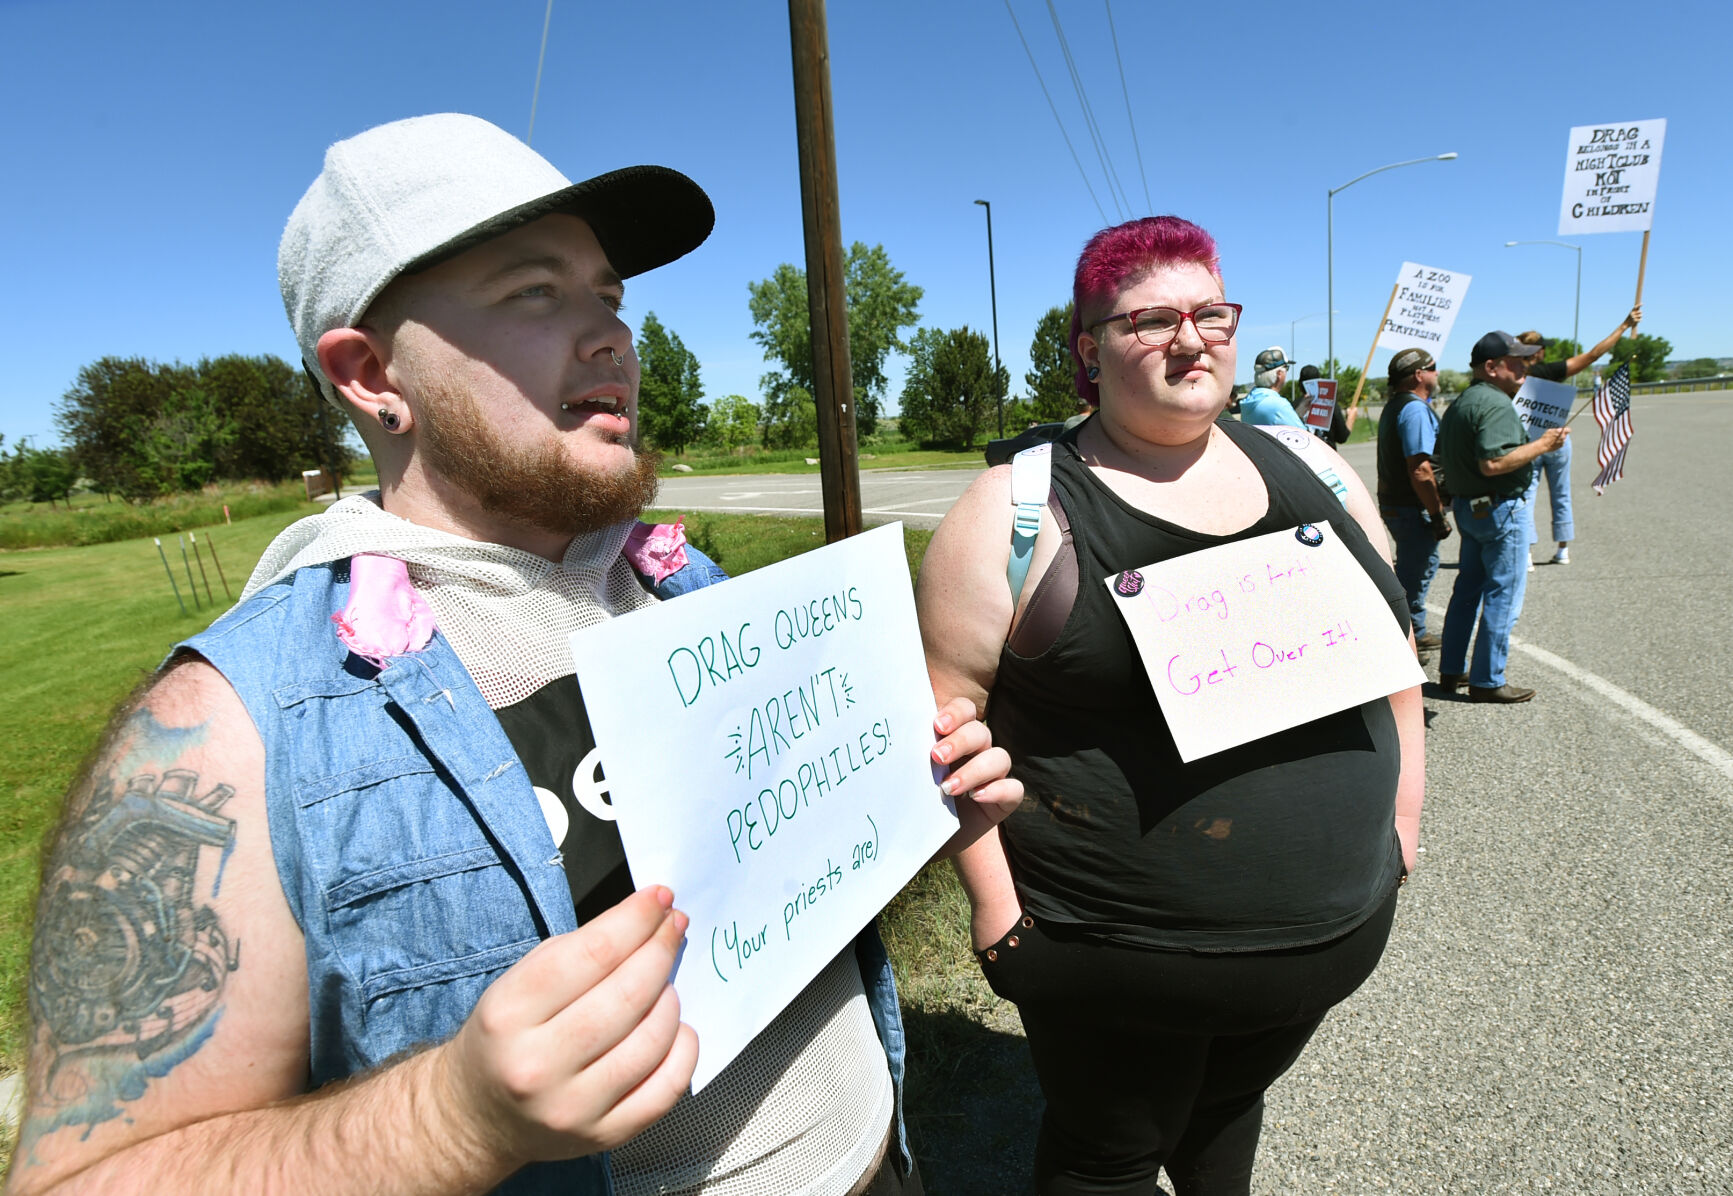 Thousands attend ZooMontanas Drag Queen Story Hour as protesters line the street